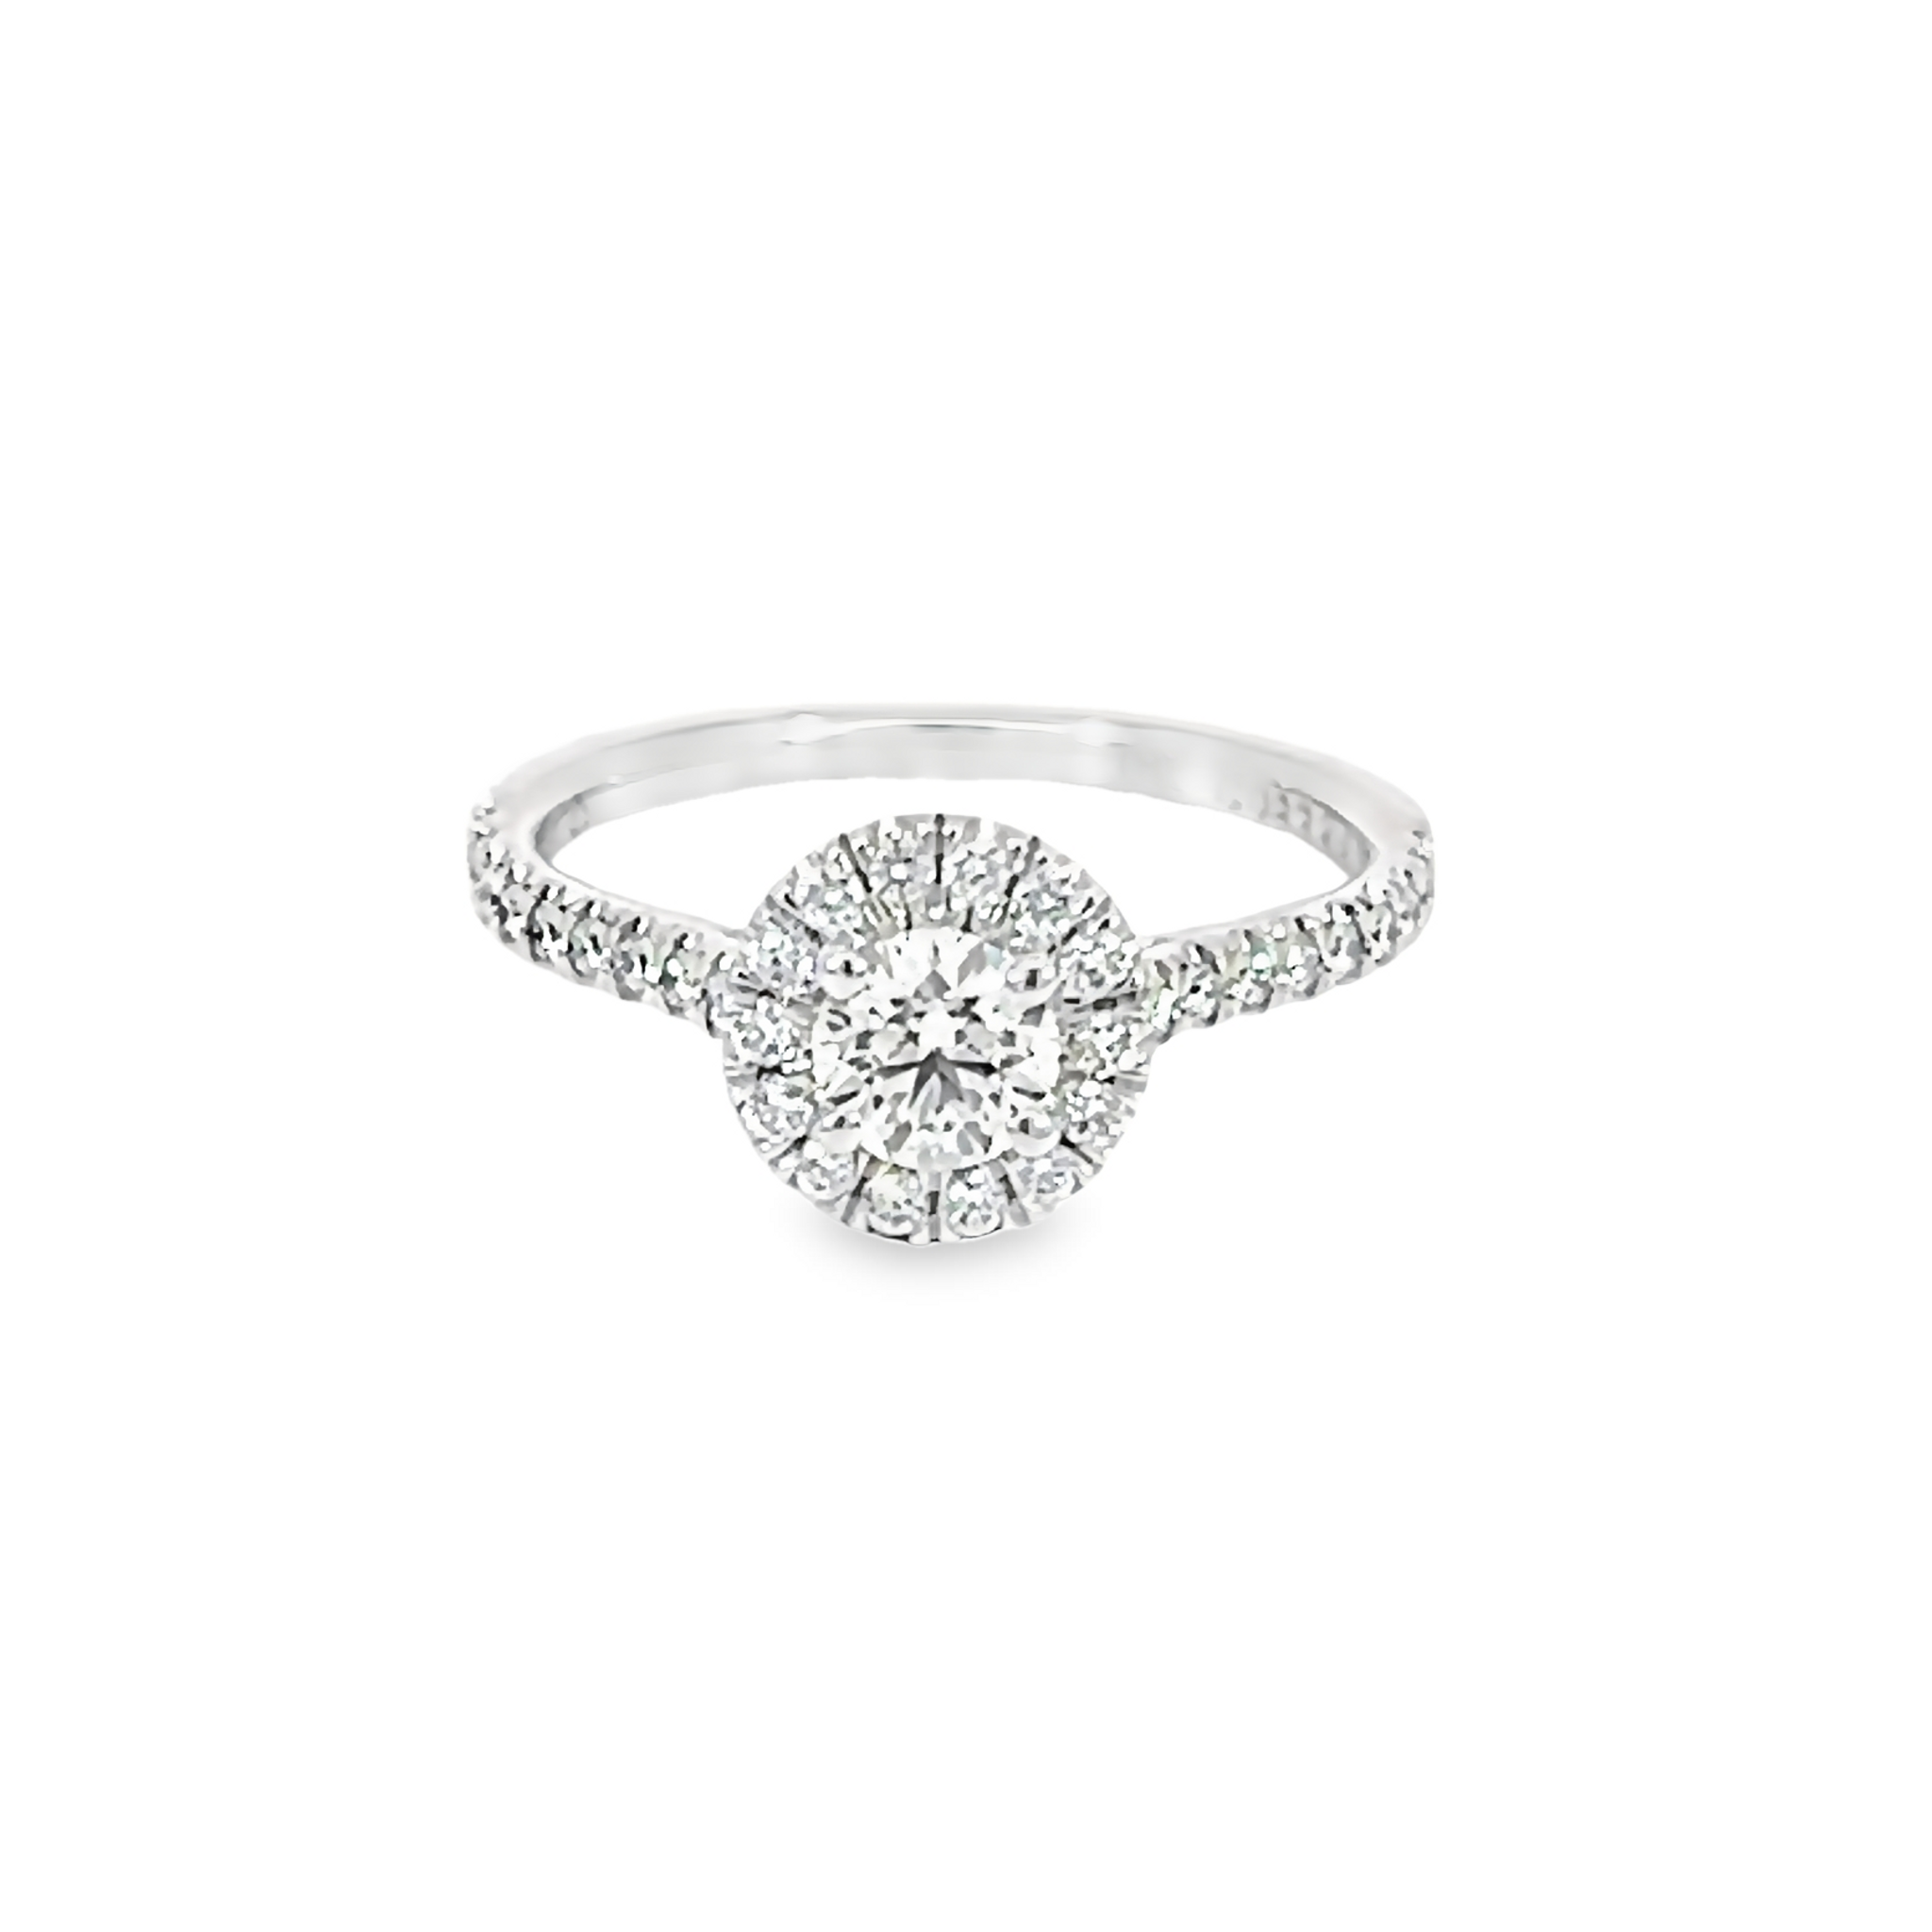 Round Brilliant Diamond Engagement Ring With Halo And Accented Shank